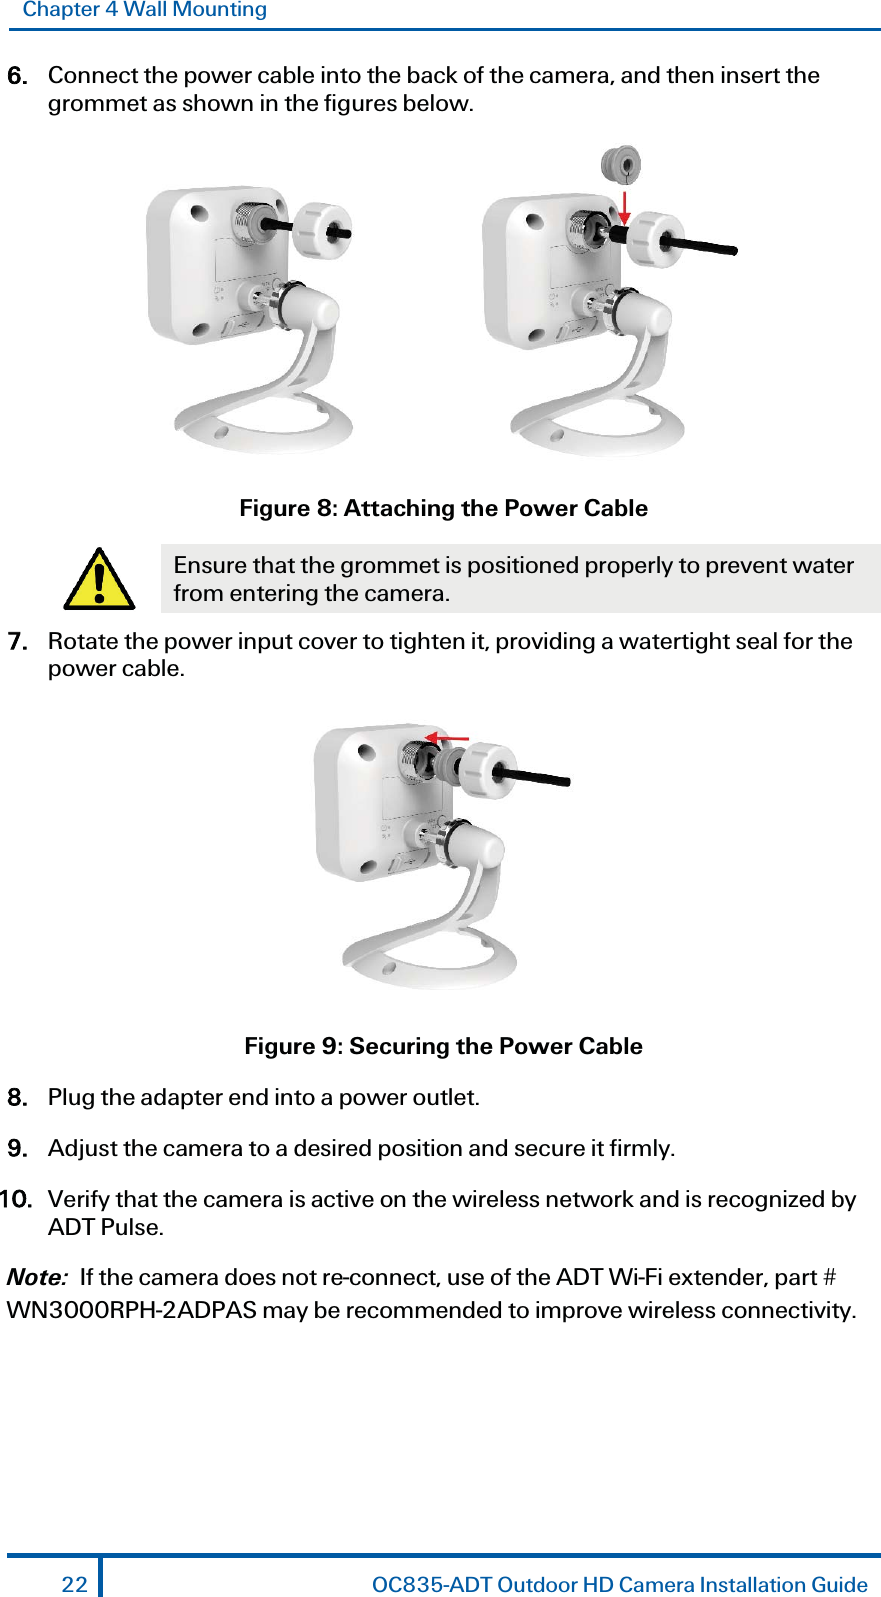 Chapter 4 Wall Mounting 6. Connect the power cable into the back of the camera, and then insert the grommet as shown in the figures below.    Figure 8: Attaching the Power Cable  Ensure that the grommet is positioned properly to prevent water from entering the camera. 7. Rotate the power input cover to tighten it, providing a watertight seal for the power cable.  Figure 9: Securing the Power Cable 8. Plug the adapter end into a power outlet. 9. Adjust the camera to a desired position and secure it firmly. 10. Verify that the camera is active on the wireless network and is recognized by ADT Pulse.  Note:  If the camera does not re-connect, use of the ADT Wi-Fi extender, part # WN3000RPH-2ADPAS may be recommended to improve wireless connectivity. 22  OC835-ADT Outdoor HD Camera Installation Guide 